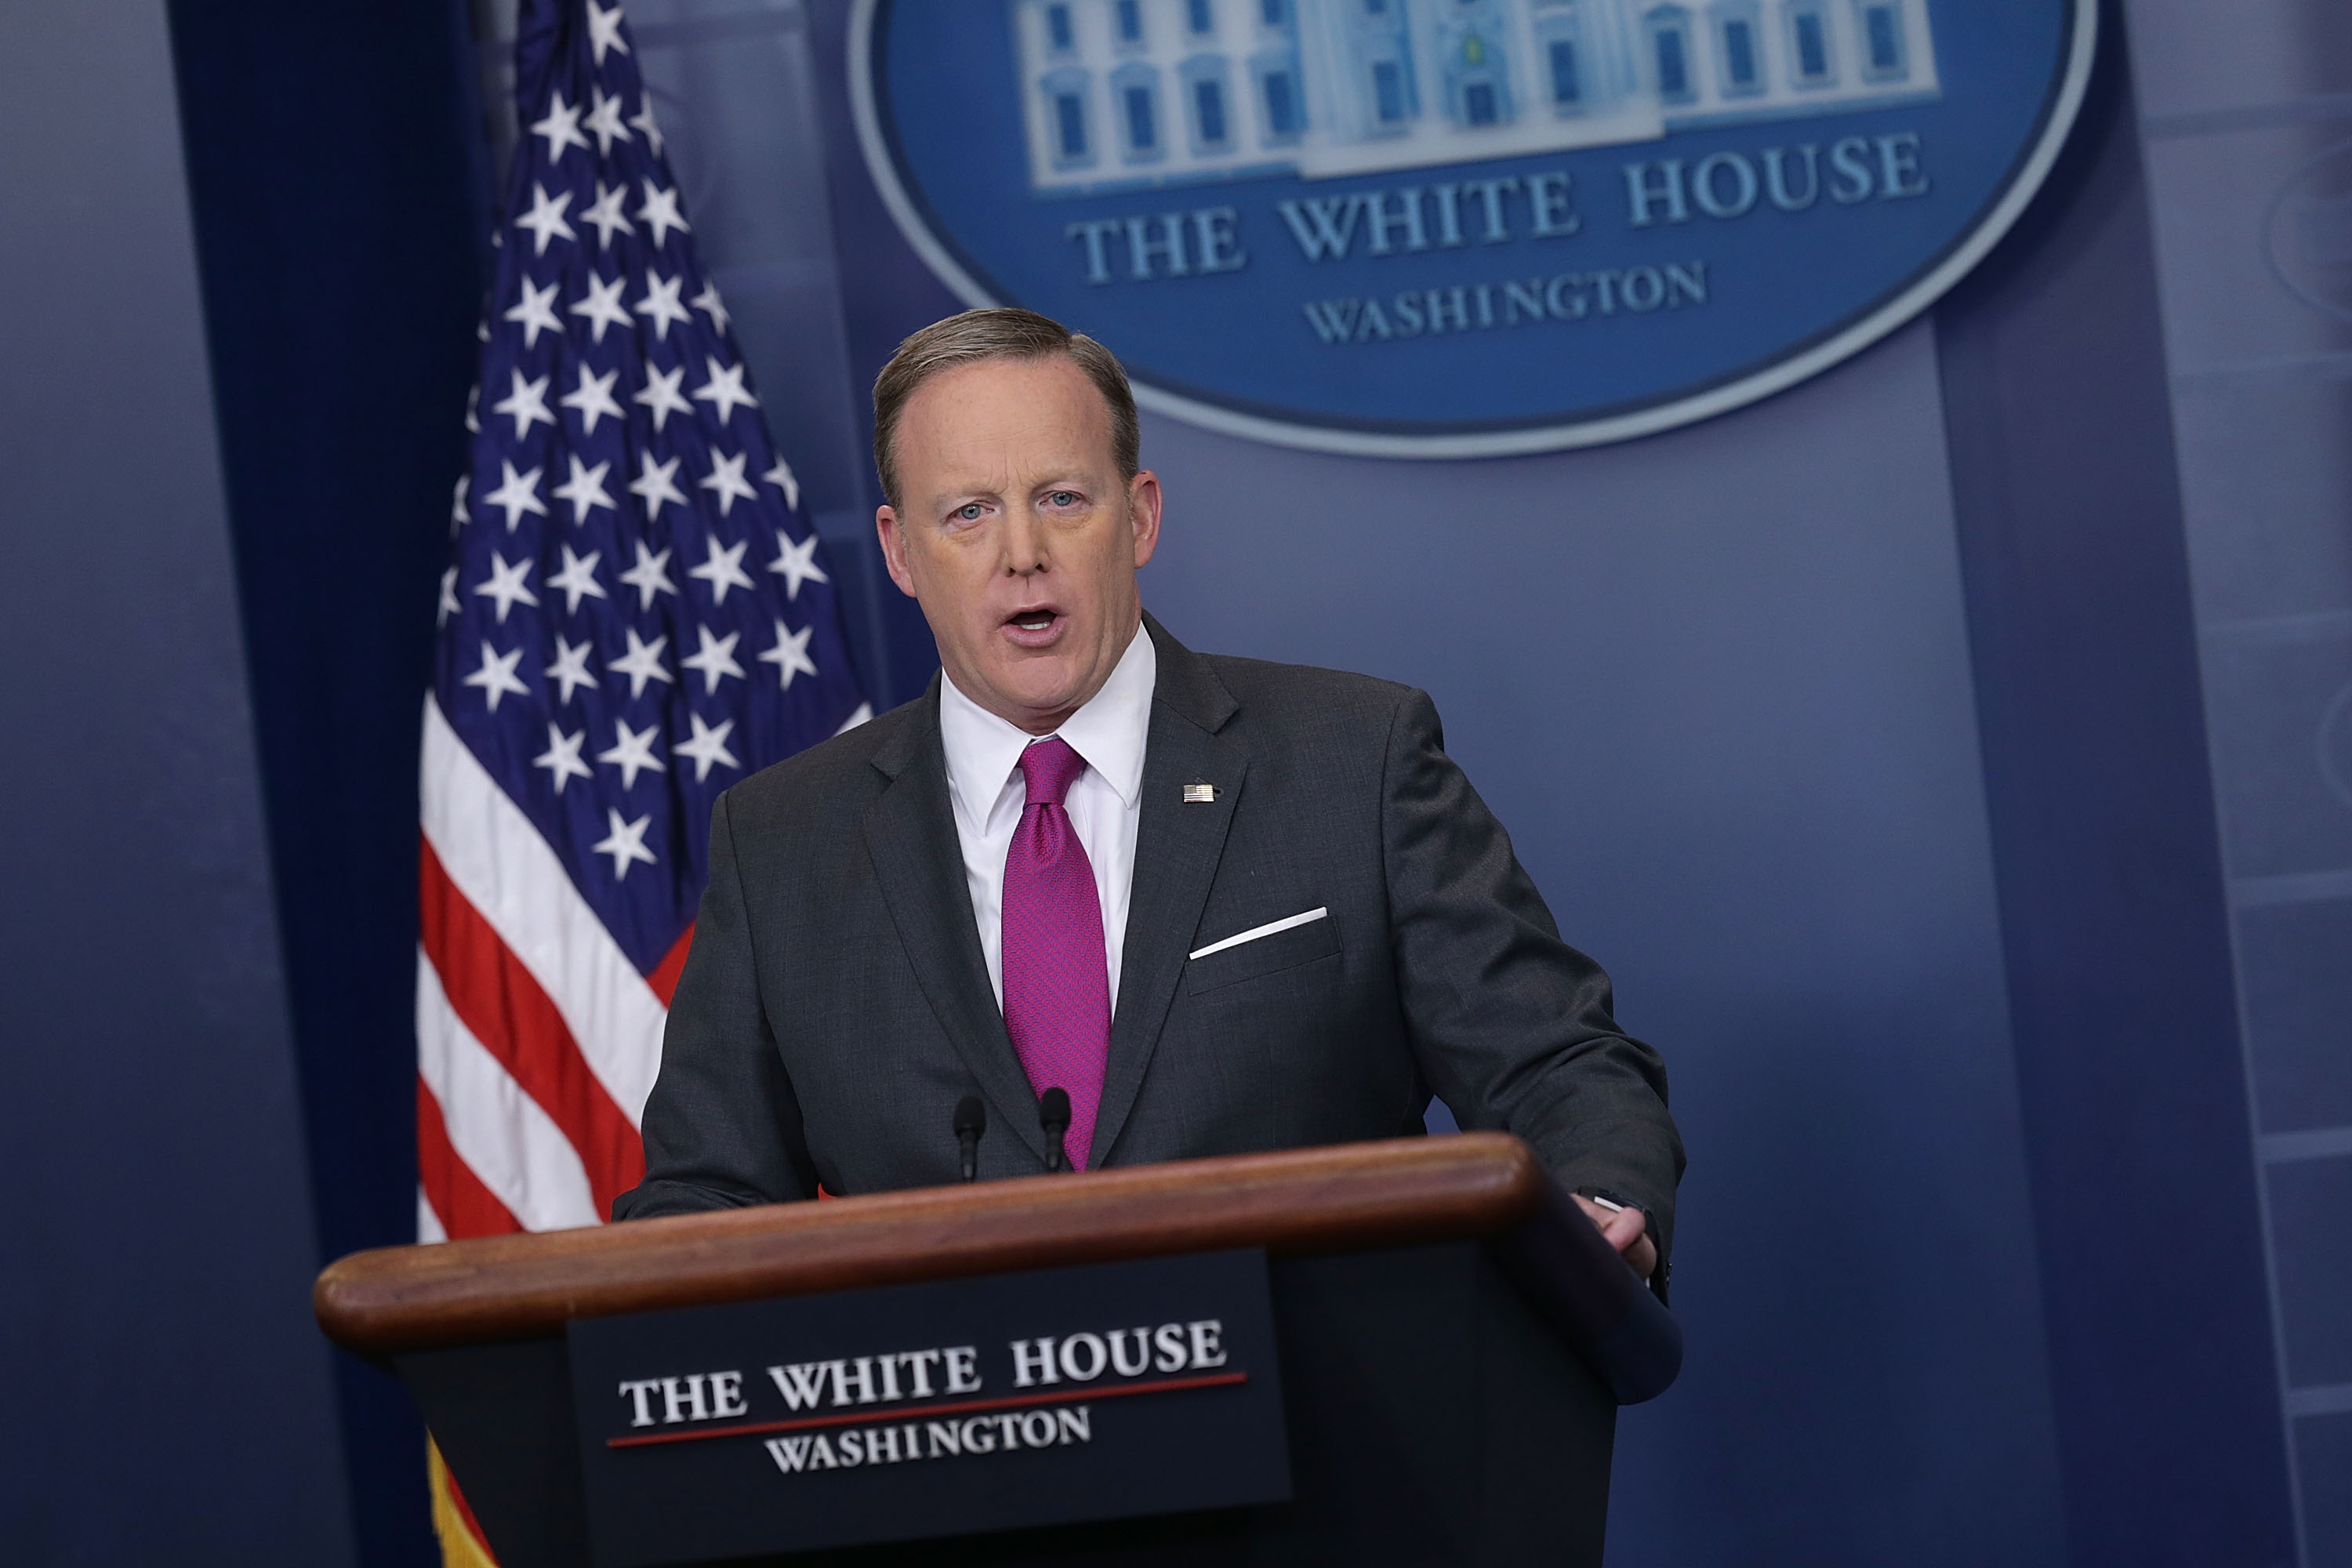 White House Press Secretary Sean Spicer speaks during the daily White House press briefing at the James Brady Press Briefing Room of the White House on March 9, 2017 in Washington, D.C. (Alex Wong/Getty Images)